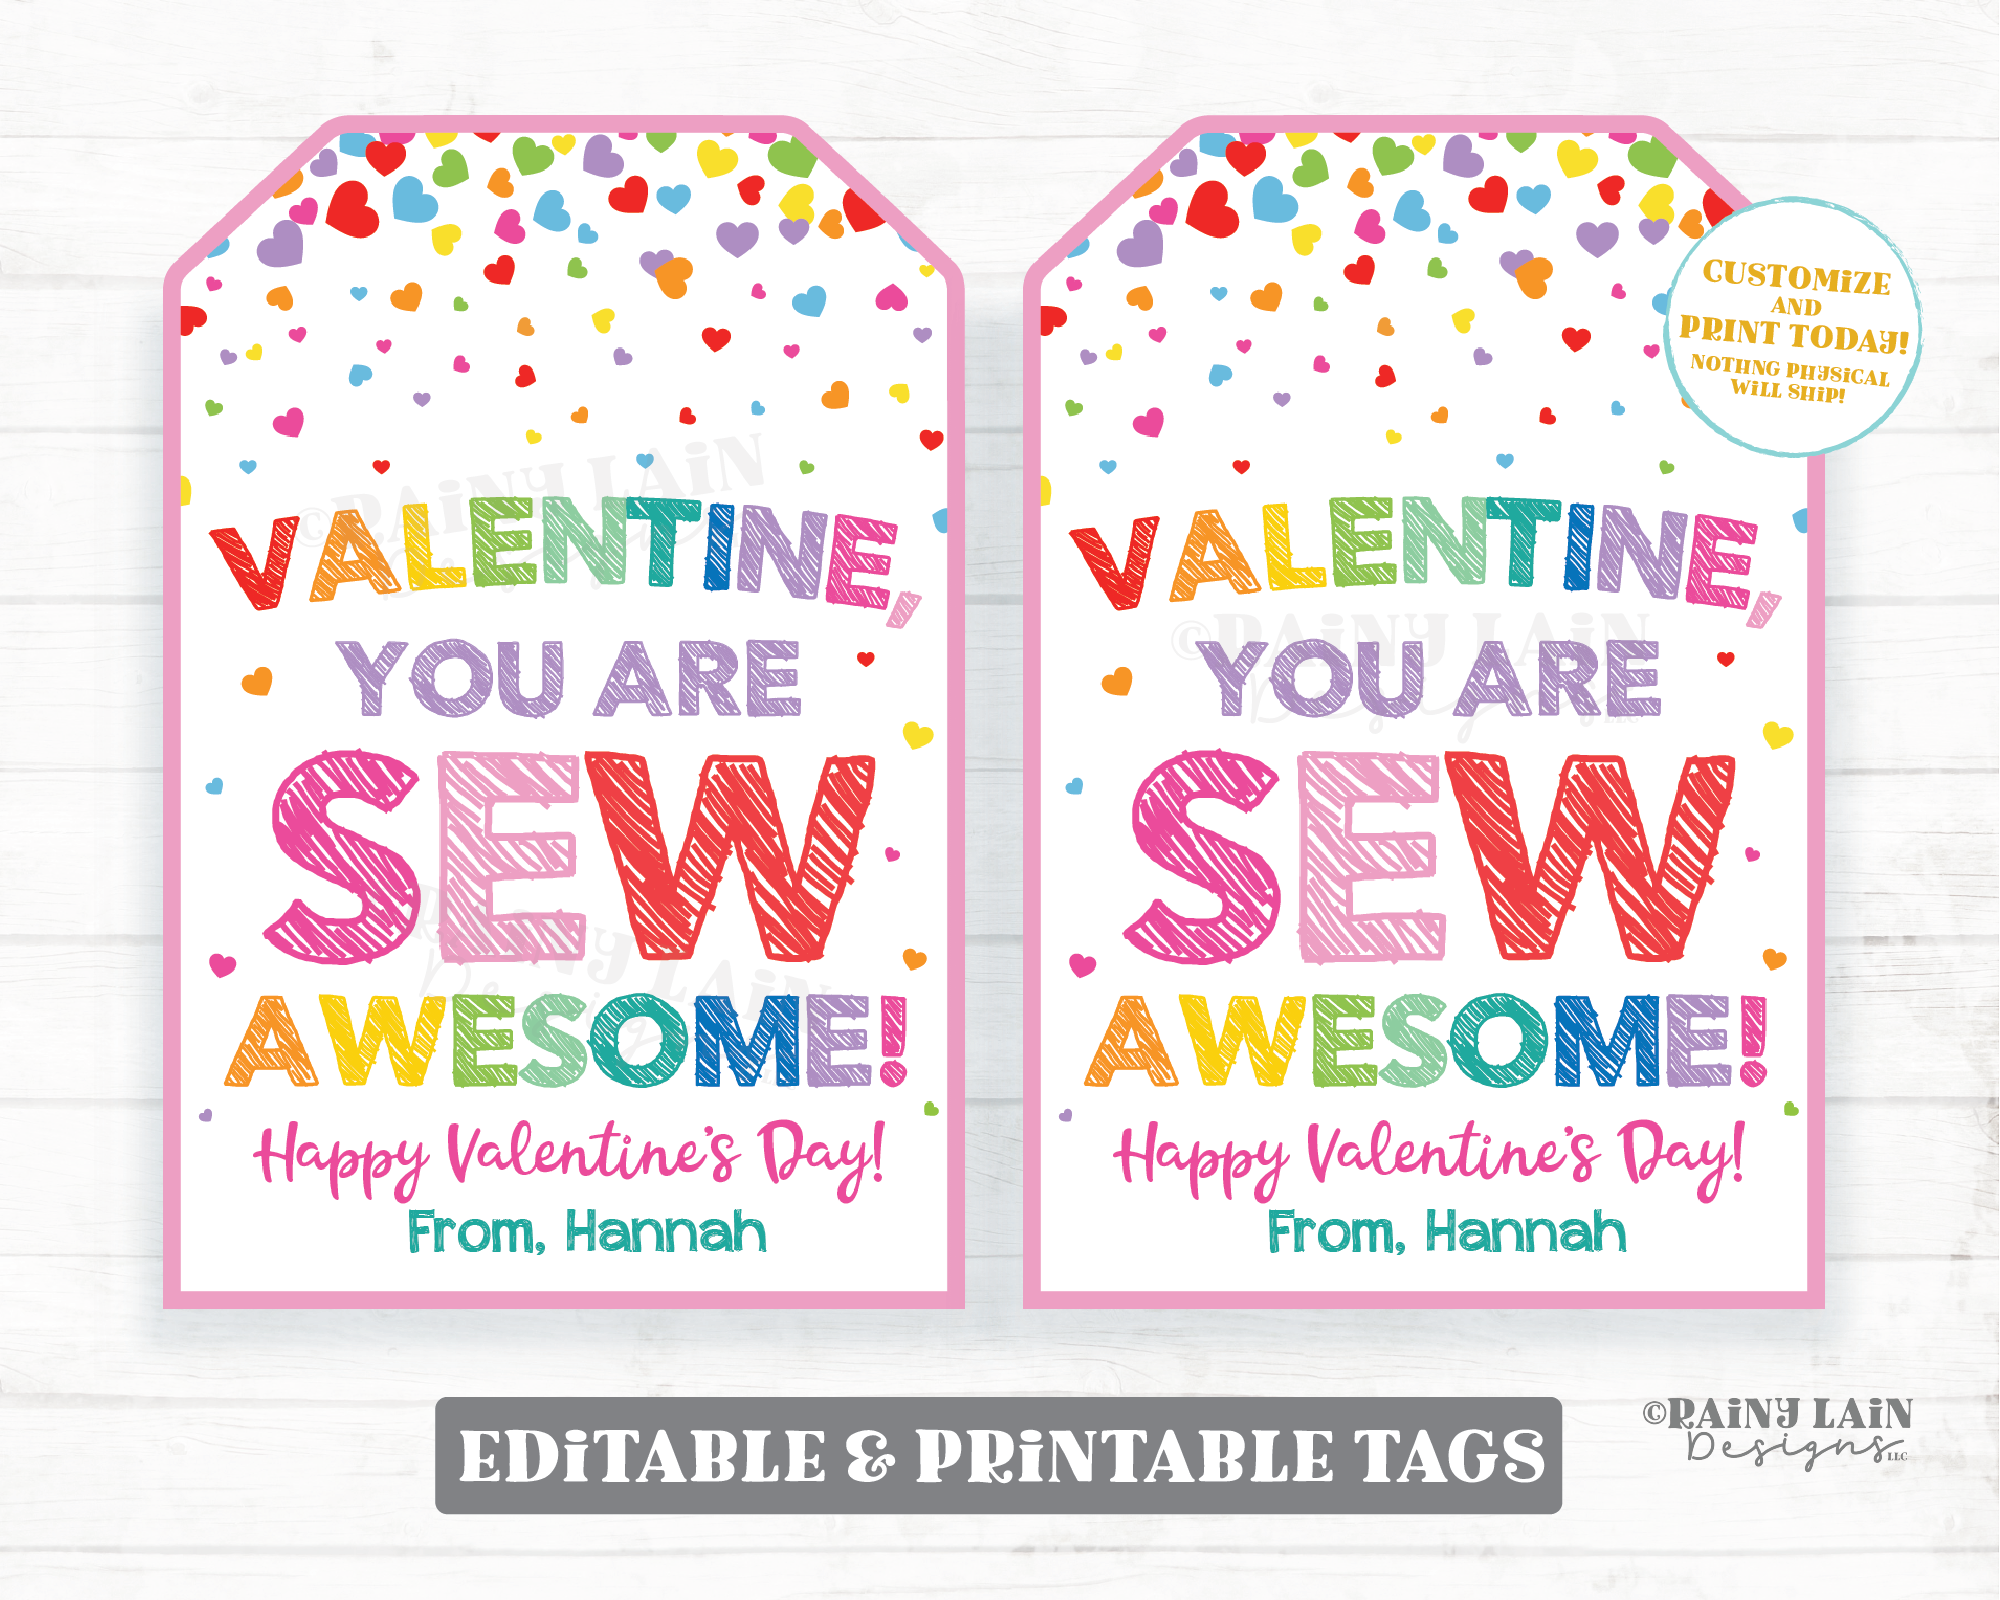 Valentine You are SEW Awesome Valentine's Day Tag Handmade Gift Friend Teacher Co-Worker Preschool Classroom Non-Candy Editable Printable